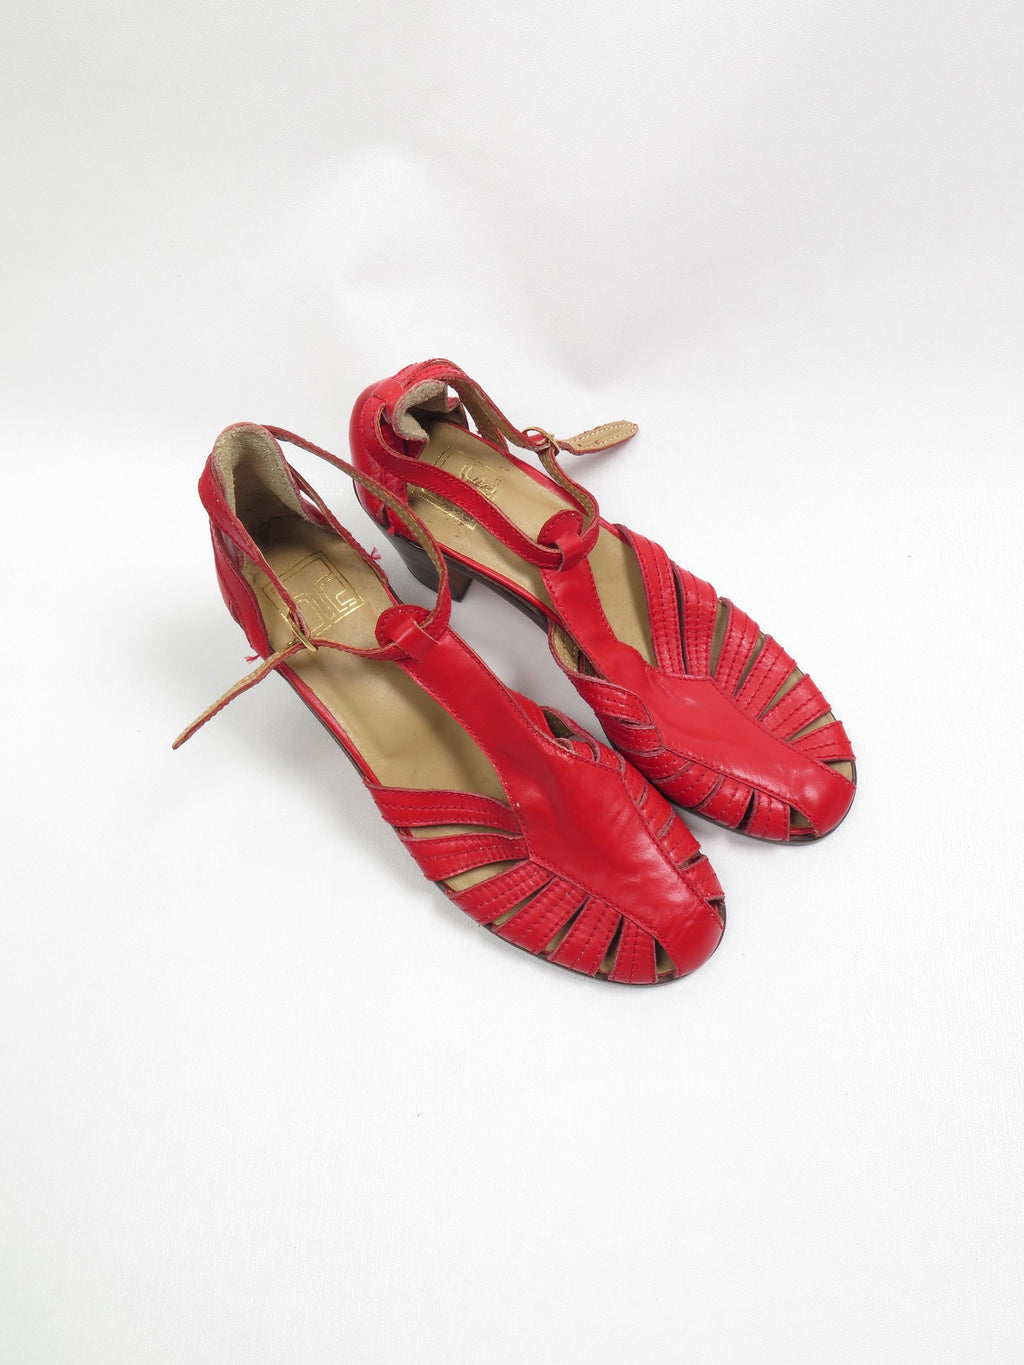 Red Vintage Sandals With Small Heels 39/6 UK - The Harlequin